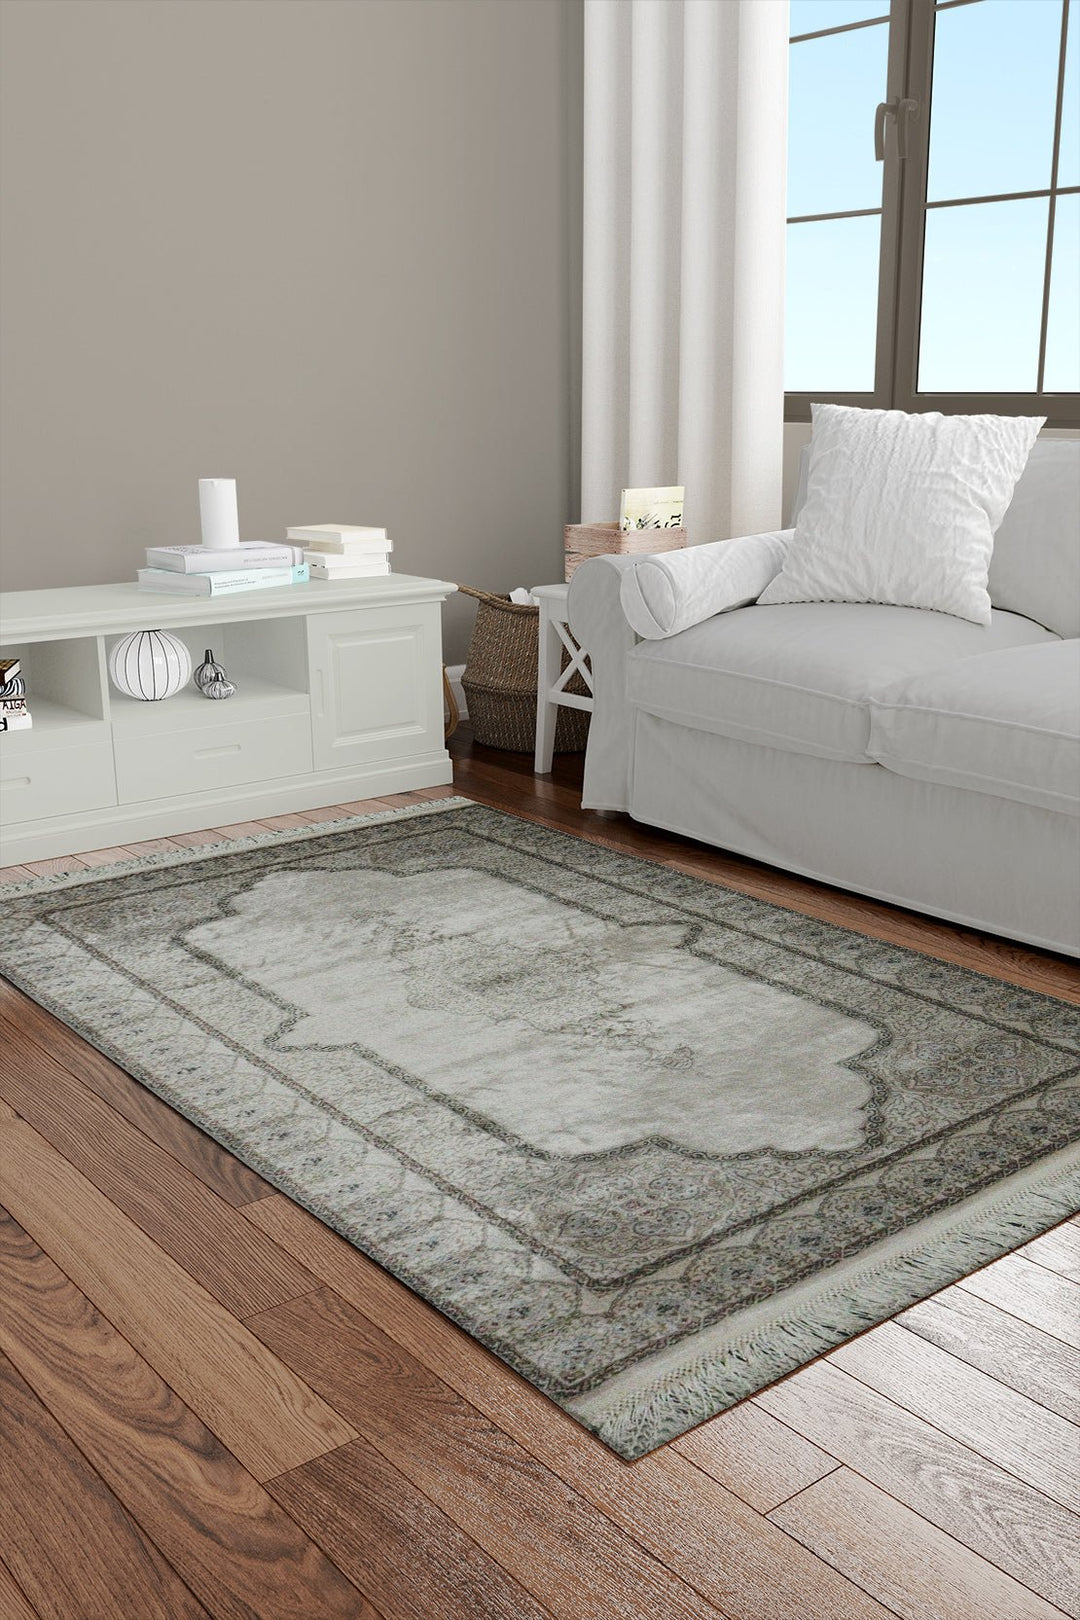 Turkish Premium Ottoman Rug - Cream - 2.6 x 4.9 FT - Resilient Construction for Long-Lasting Use - V Surfaces